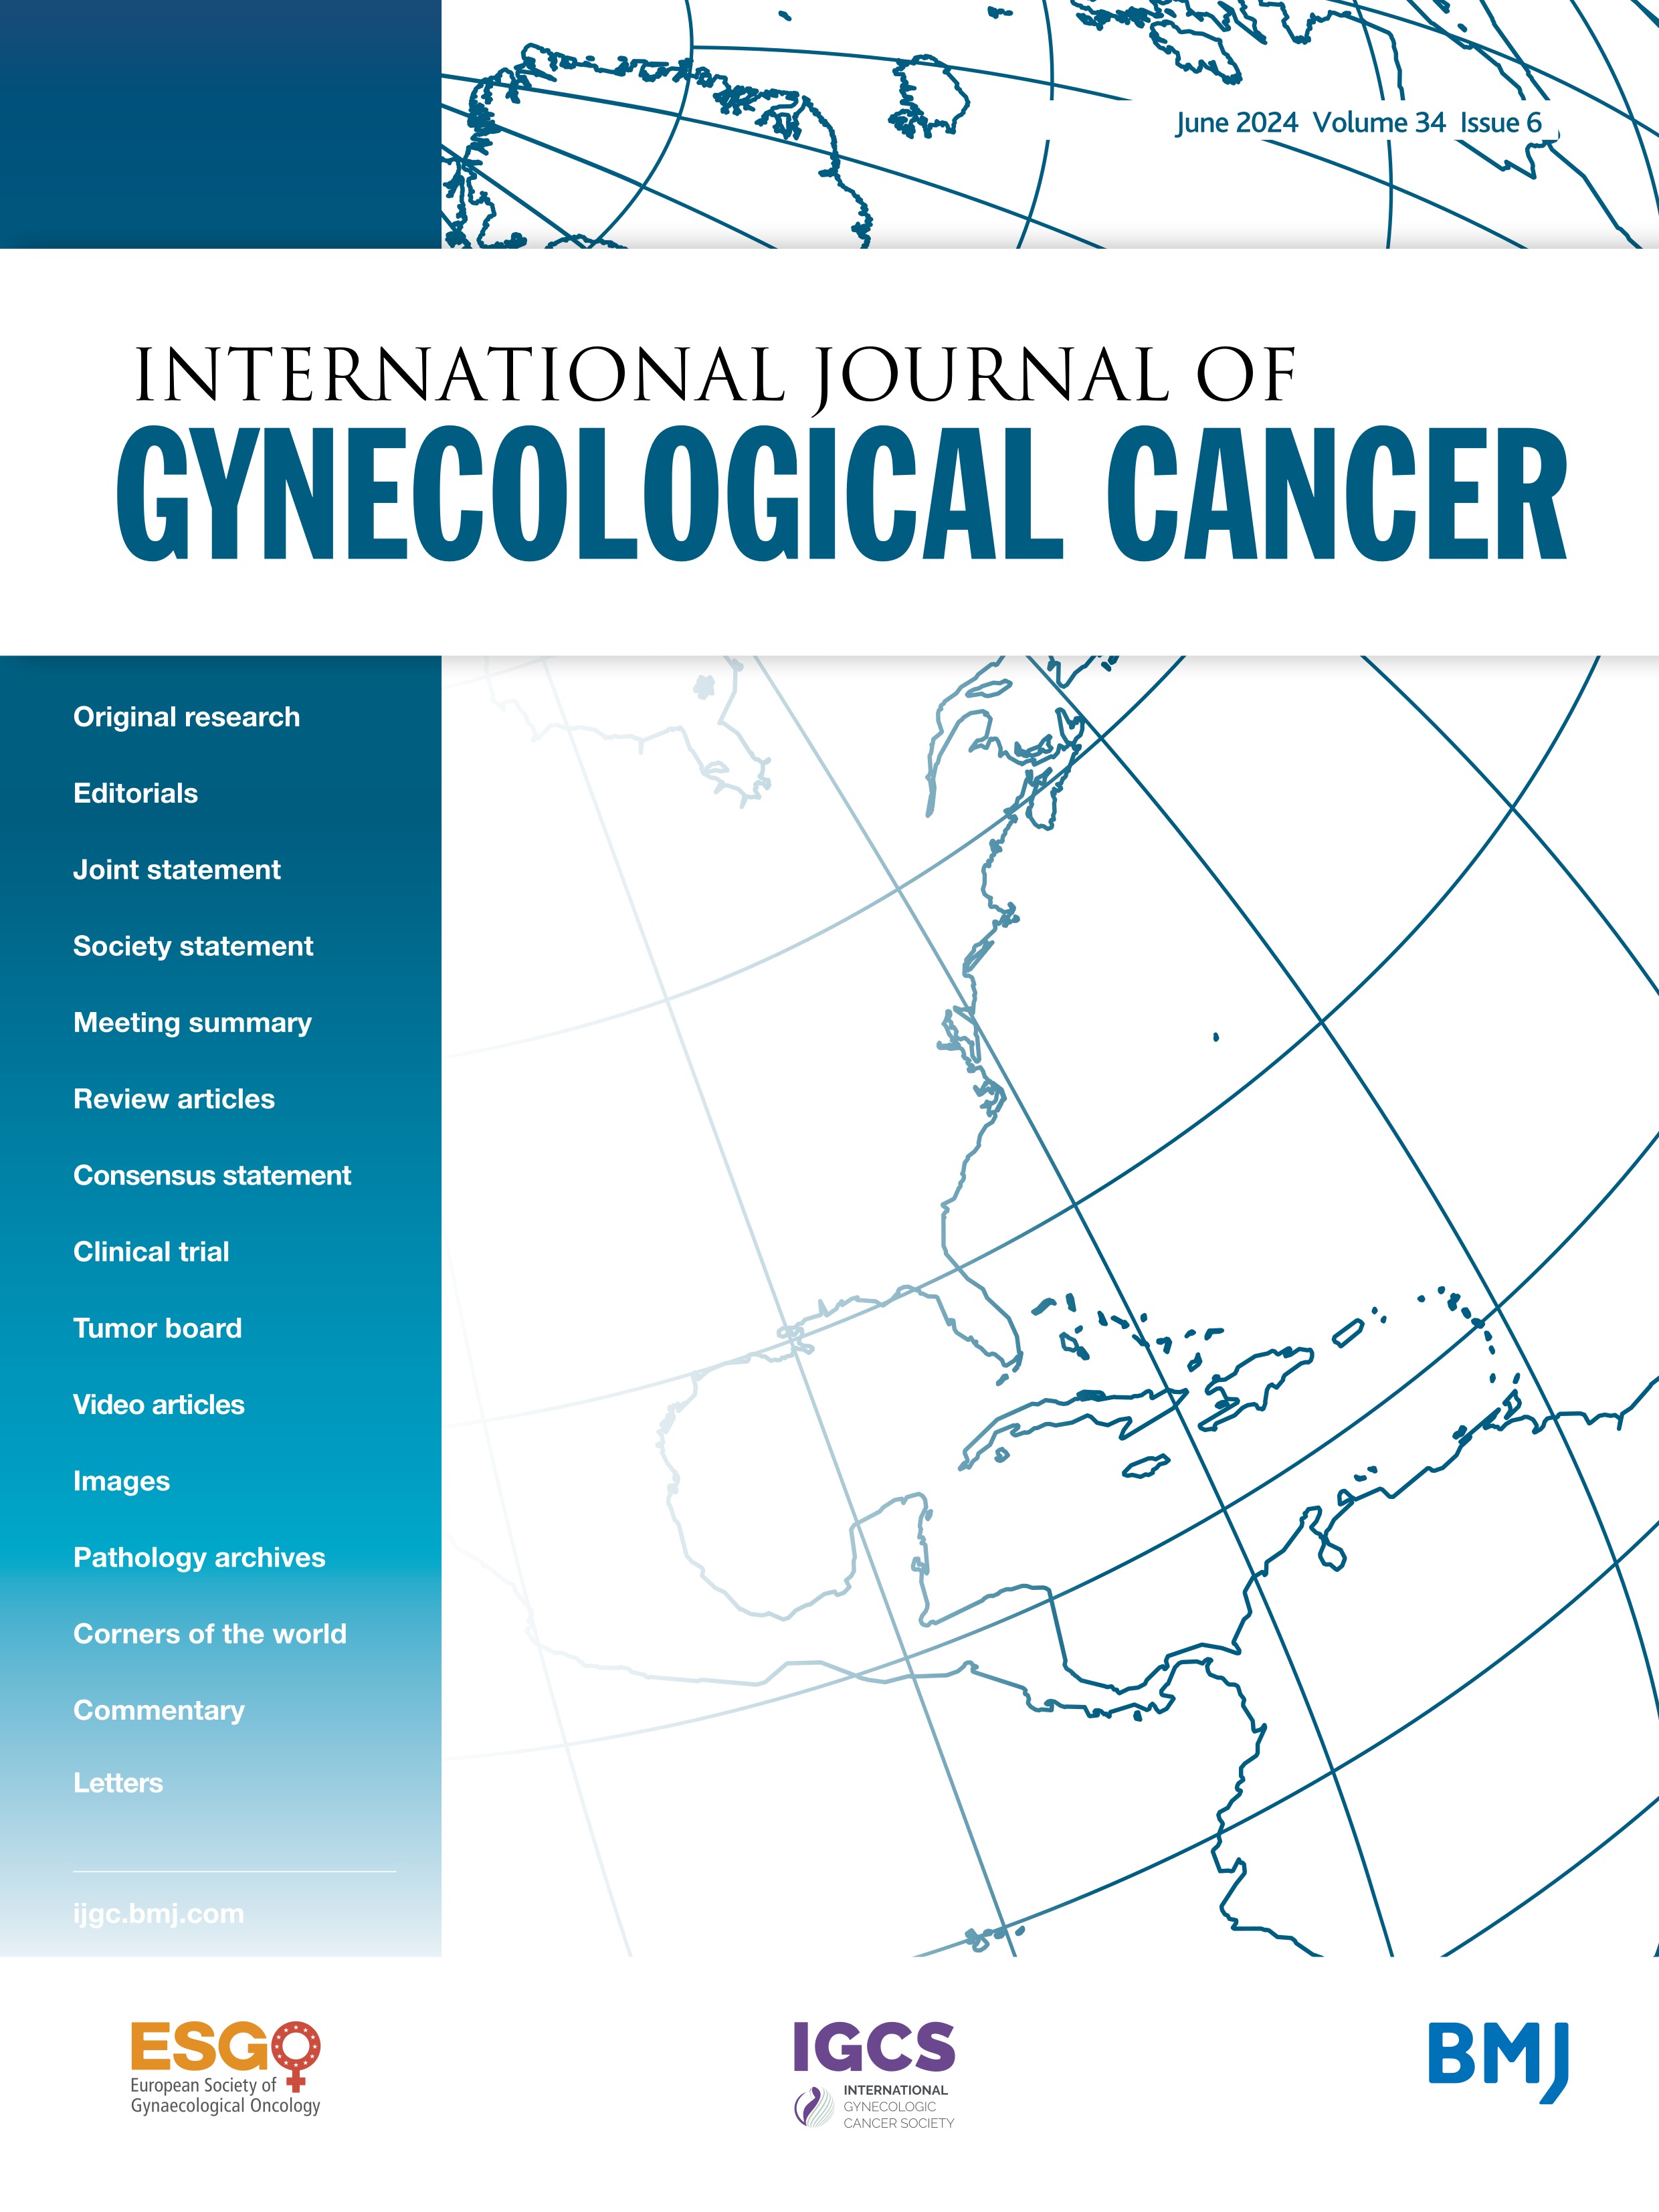 Endometriosis-associated ovarian cancer: a different clinical entity